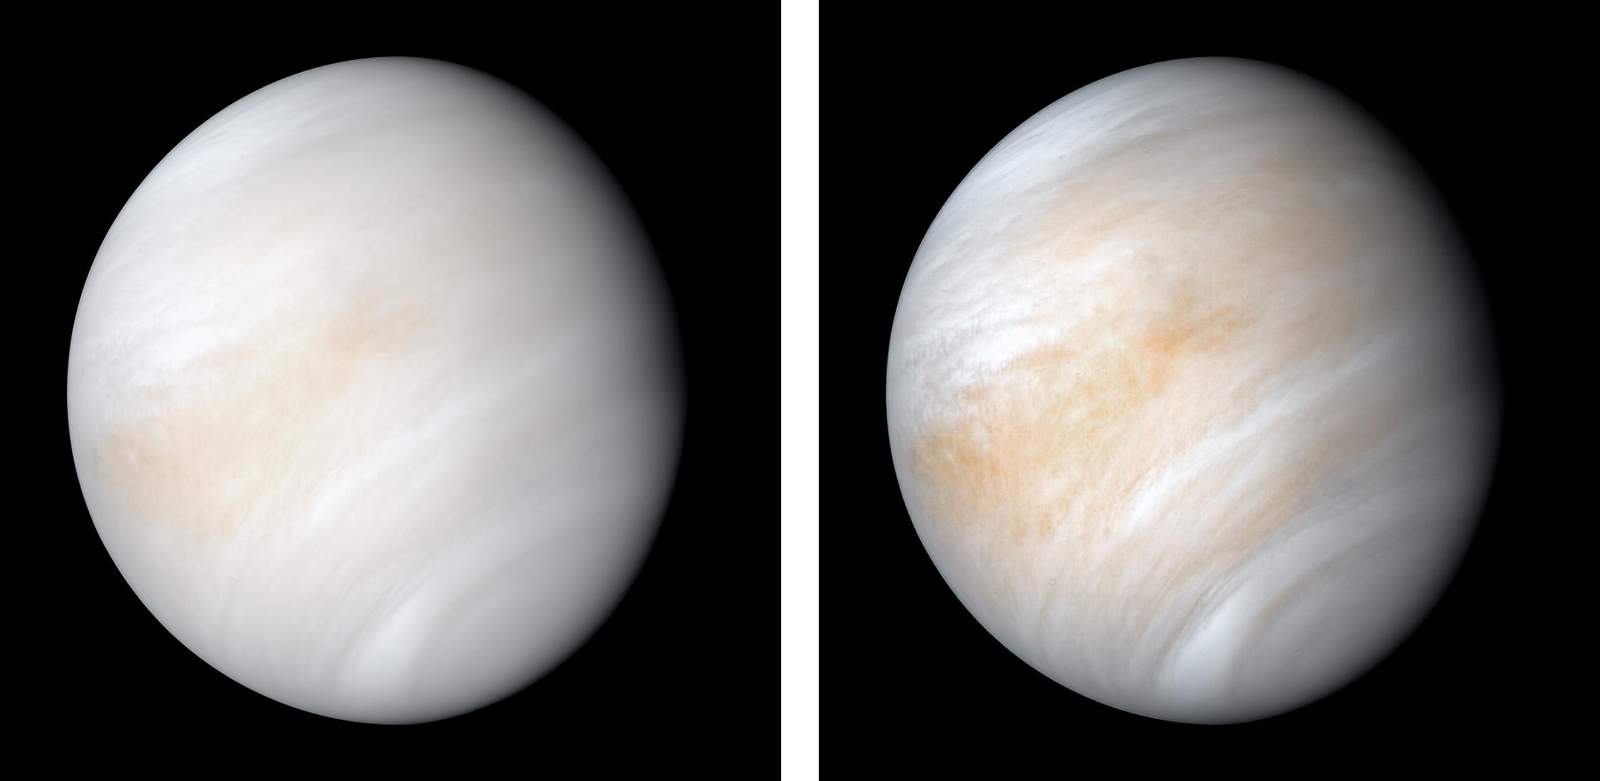 The curious tale of searching for signs of life on Venus